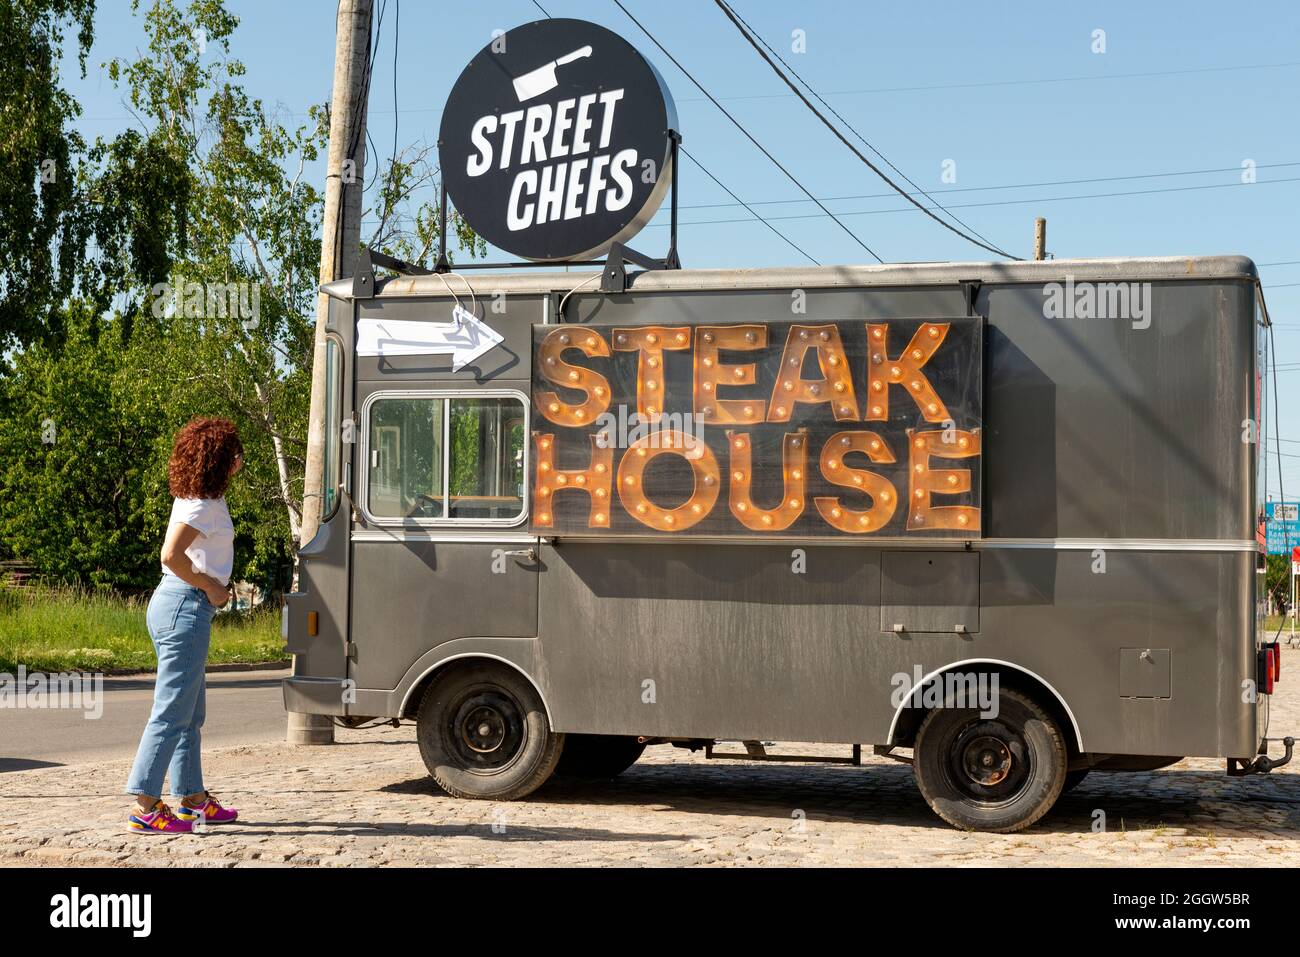 Fast food business Street Chefs Steak House pointed arrow advertisement on vintage Fiat 241 T San Giorgio truck by a road near Sofia, Bulgaria Stock Photo